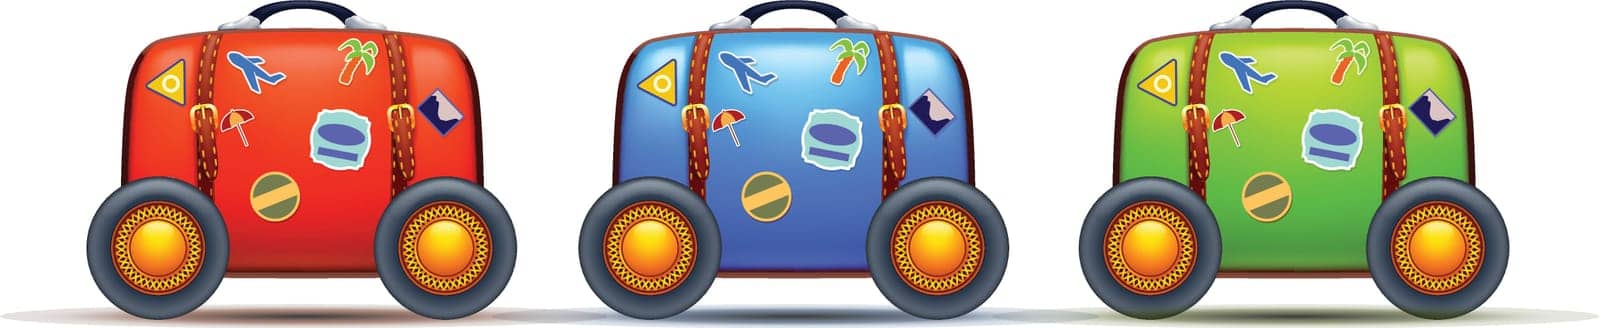 illustration of three old suitcases with stickers and wheels different color on white background